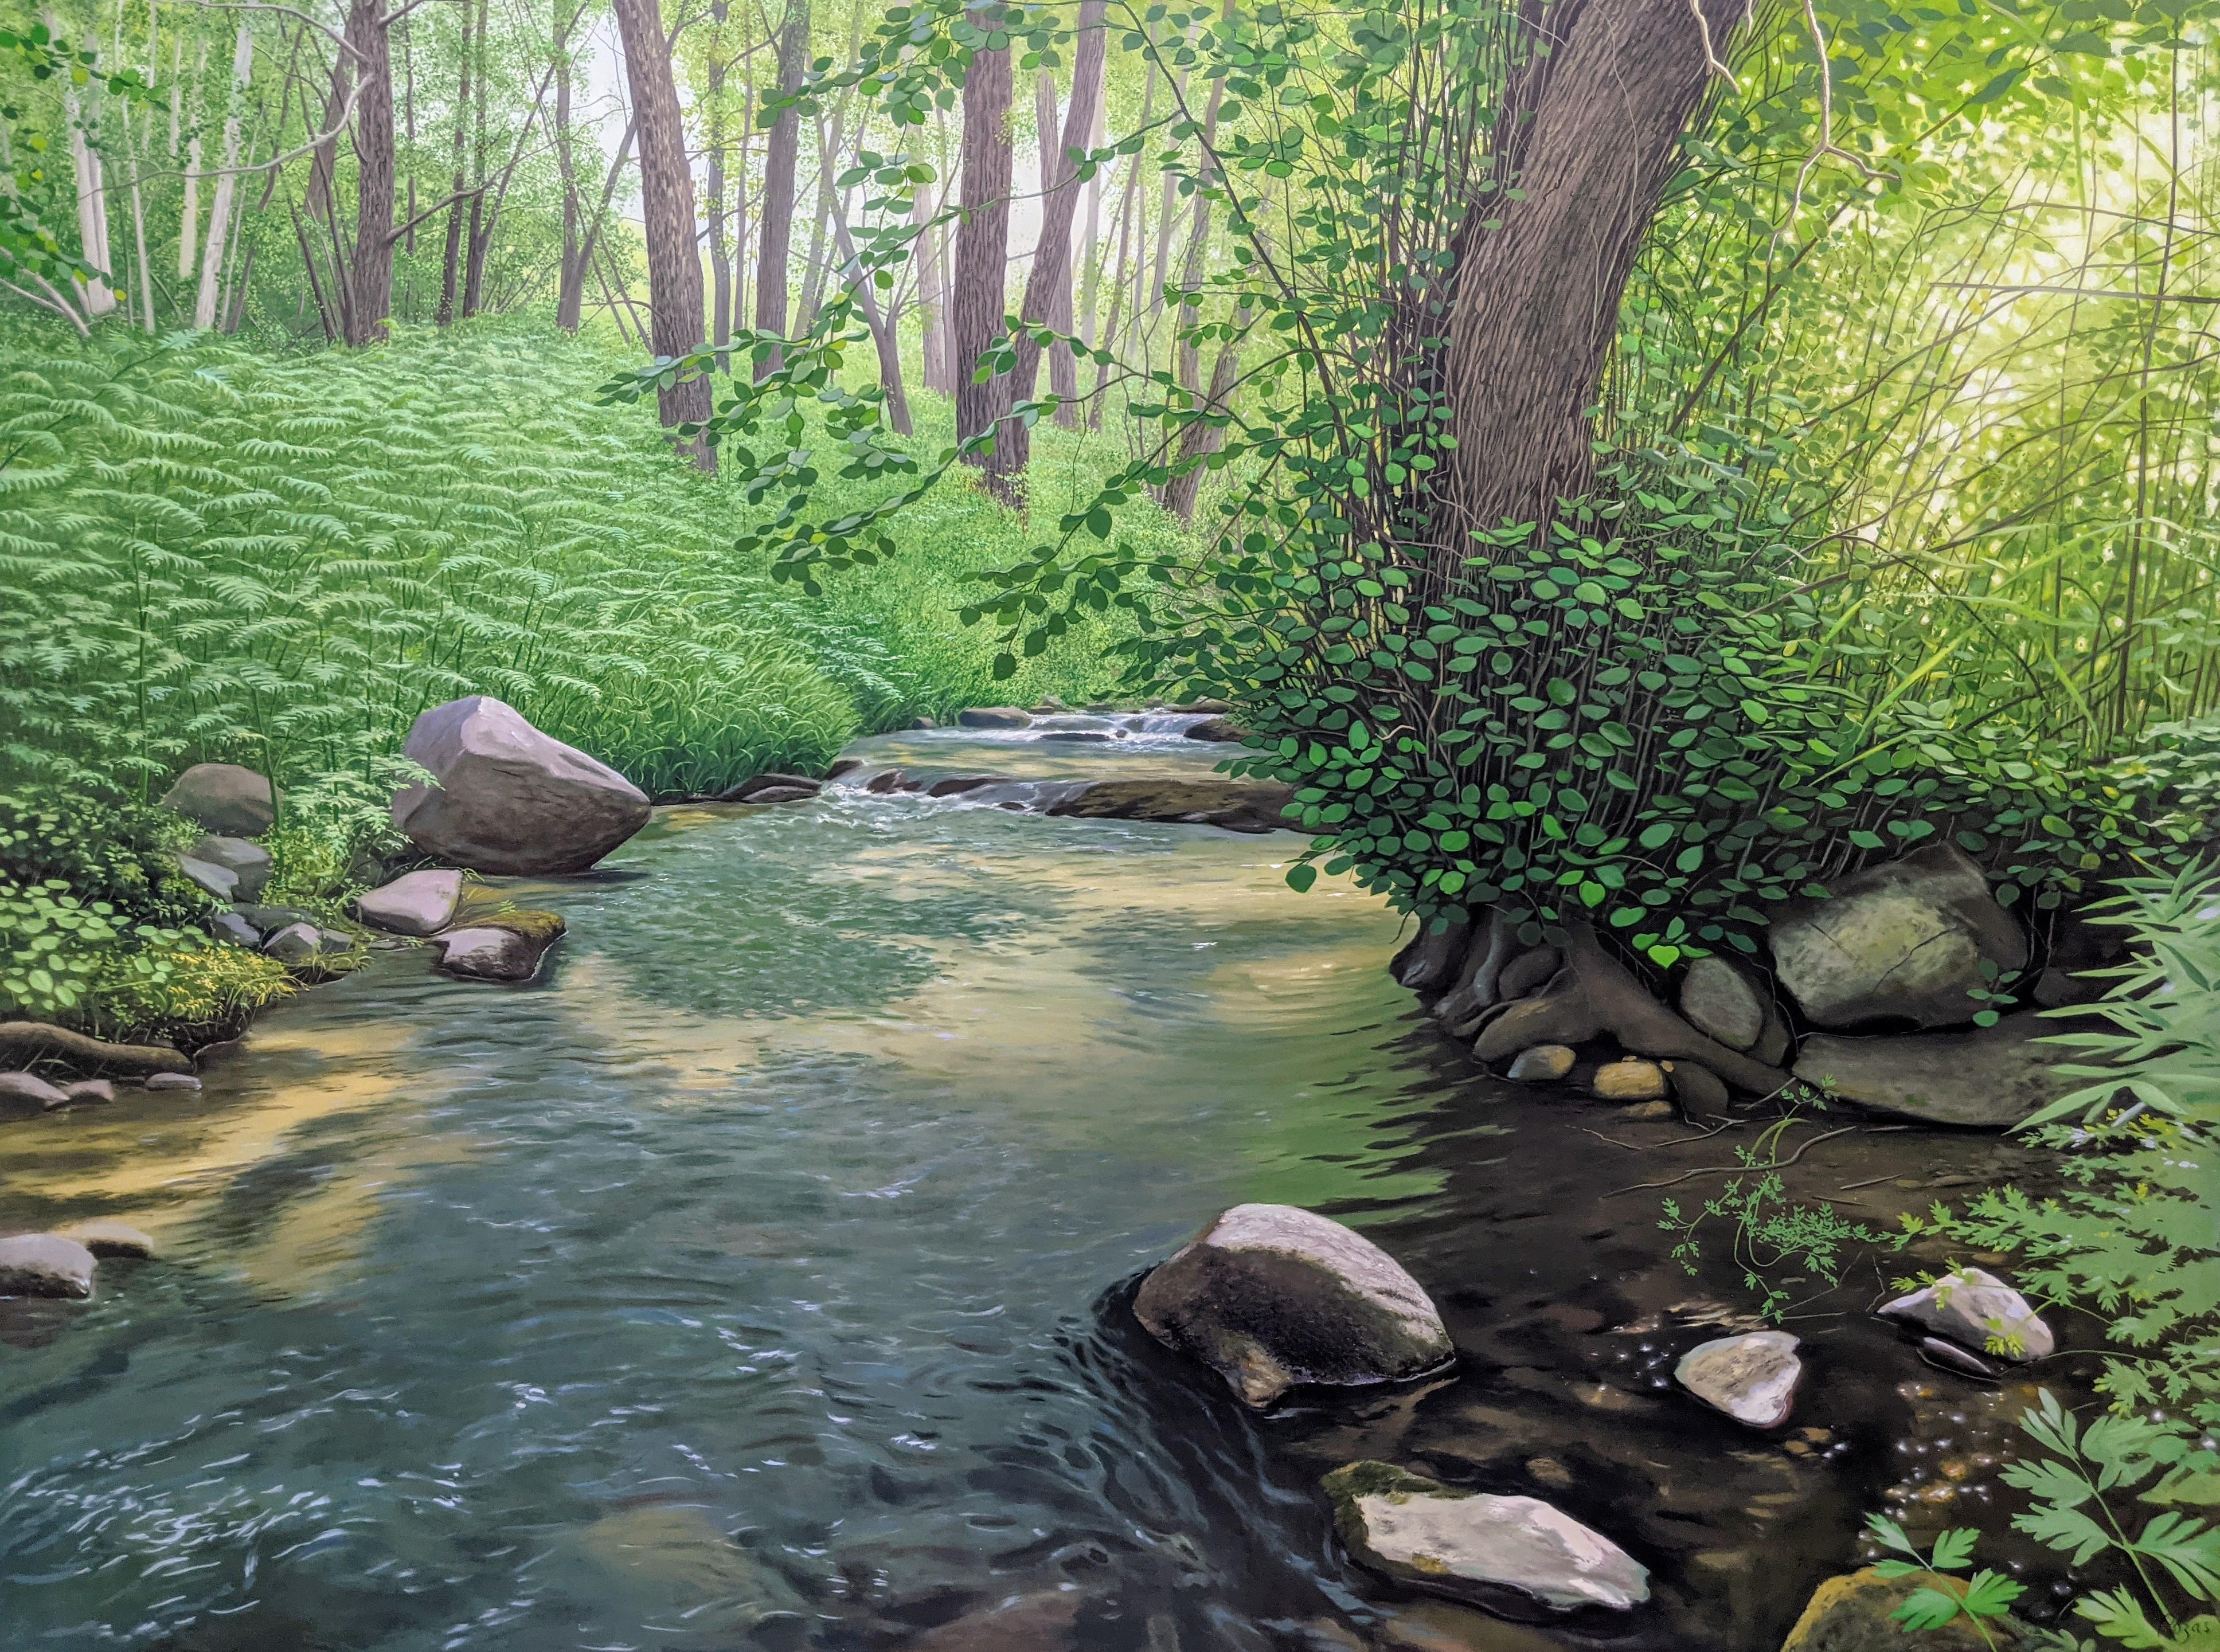 René Monzón Relova “Pozas” Landscape Painting - The River With No Name-Highly Detailed Lush Wooded Landscape with Babbling Brook